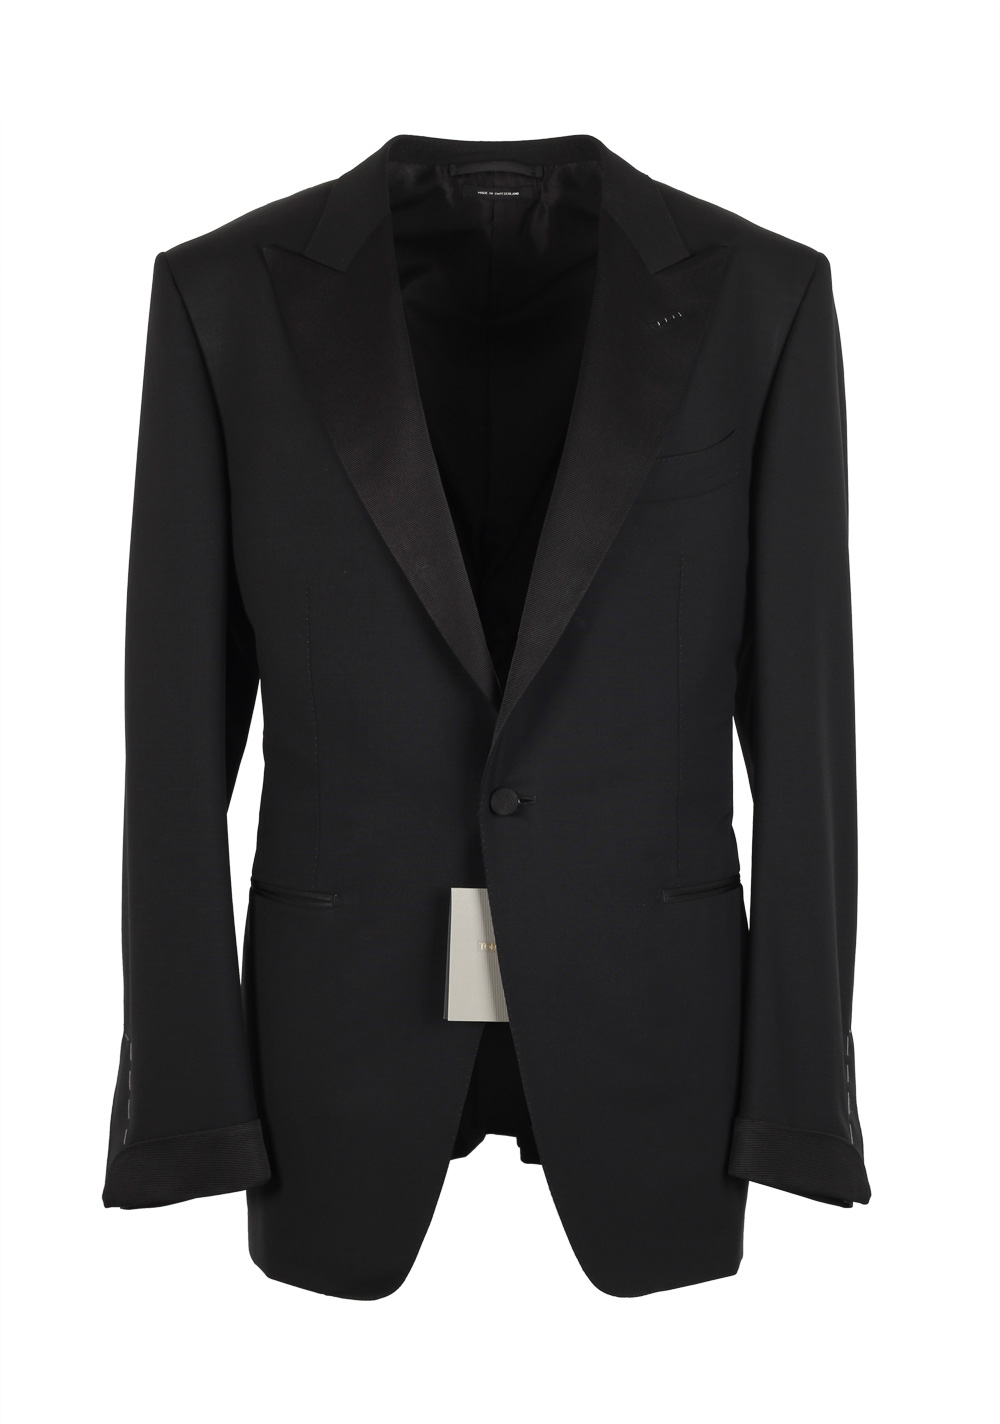 TOM FORD O’Connor Black Peaked Lapel Tuxedo Smoking Suit Size 52 / 42R ...